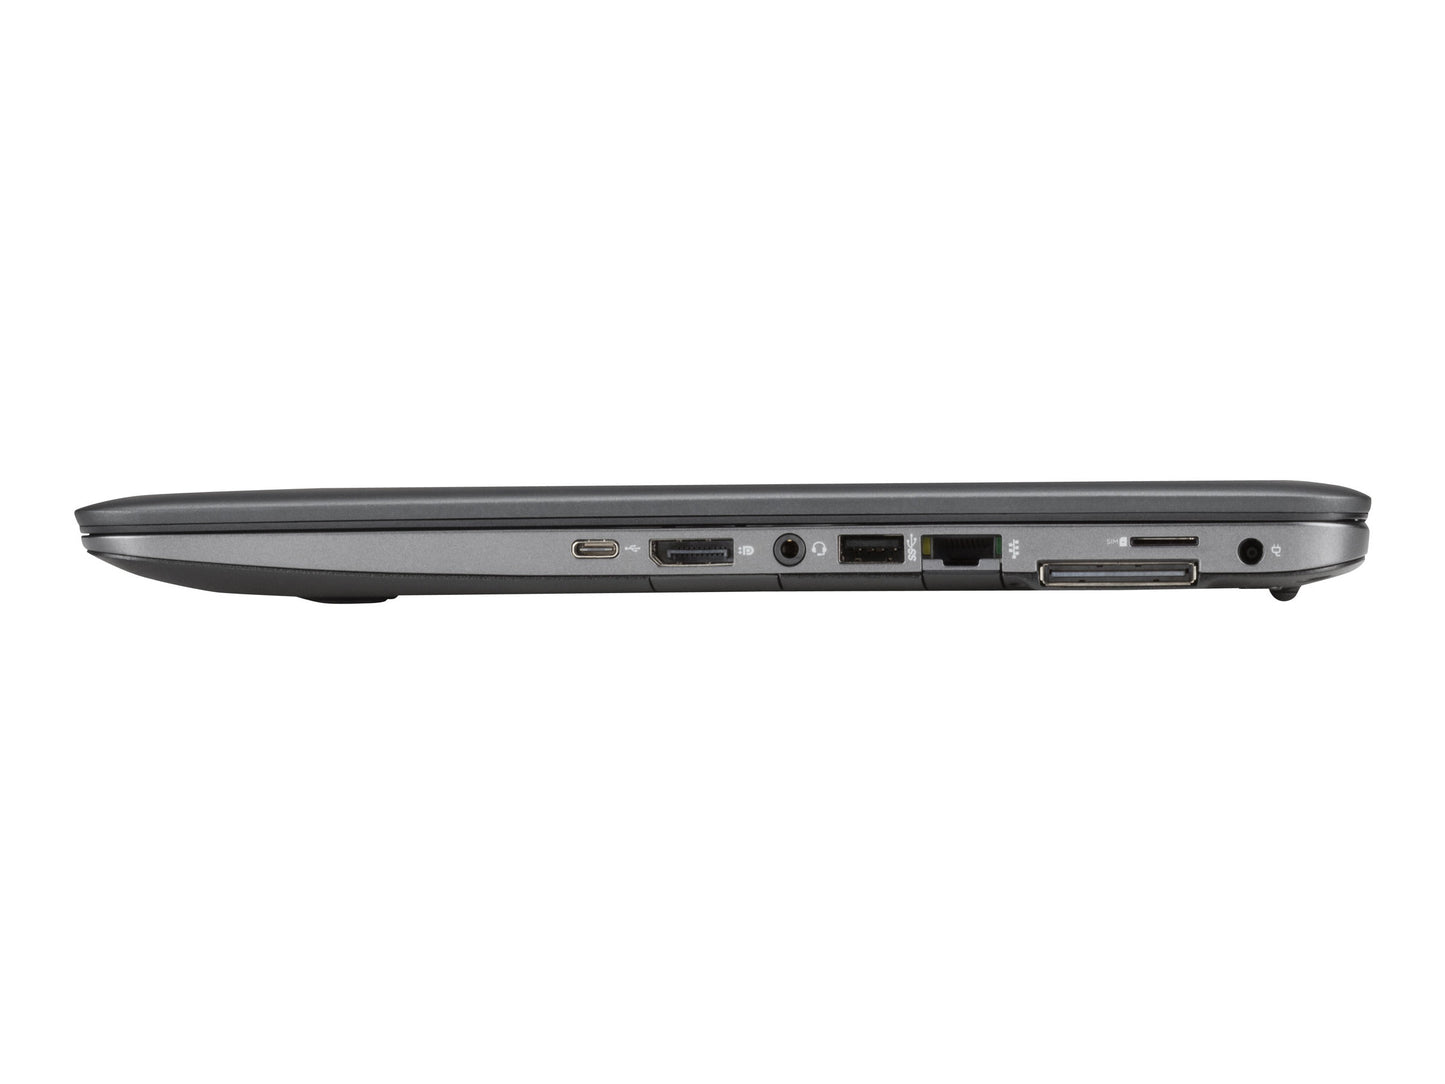 Refurbished HP ZBook 17 G3 with FHD dispay